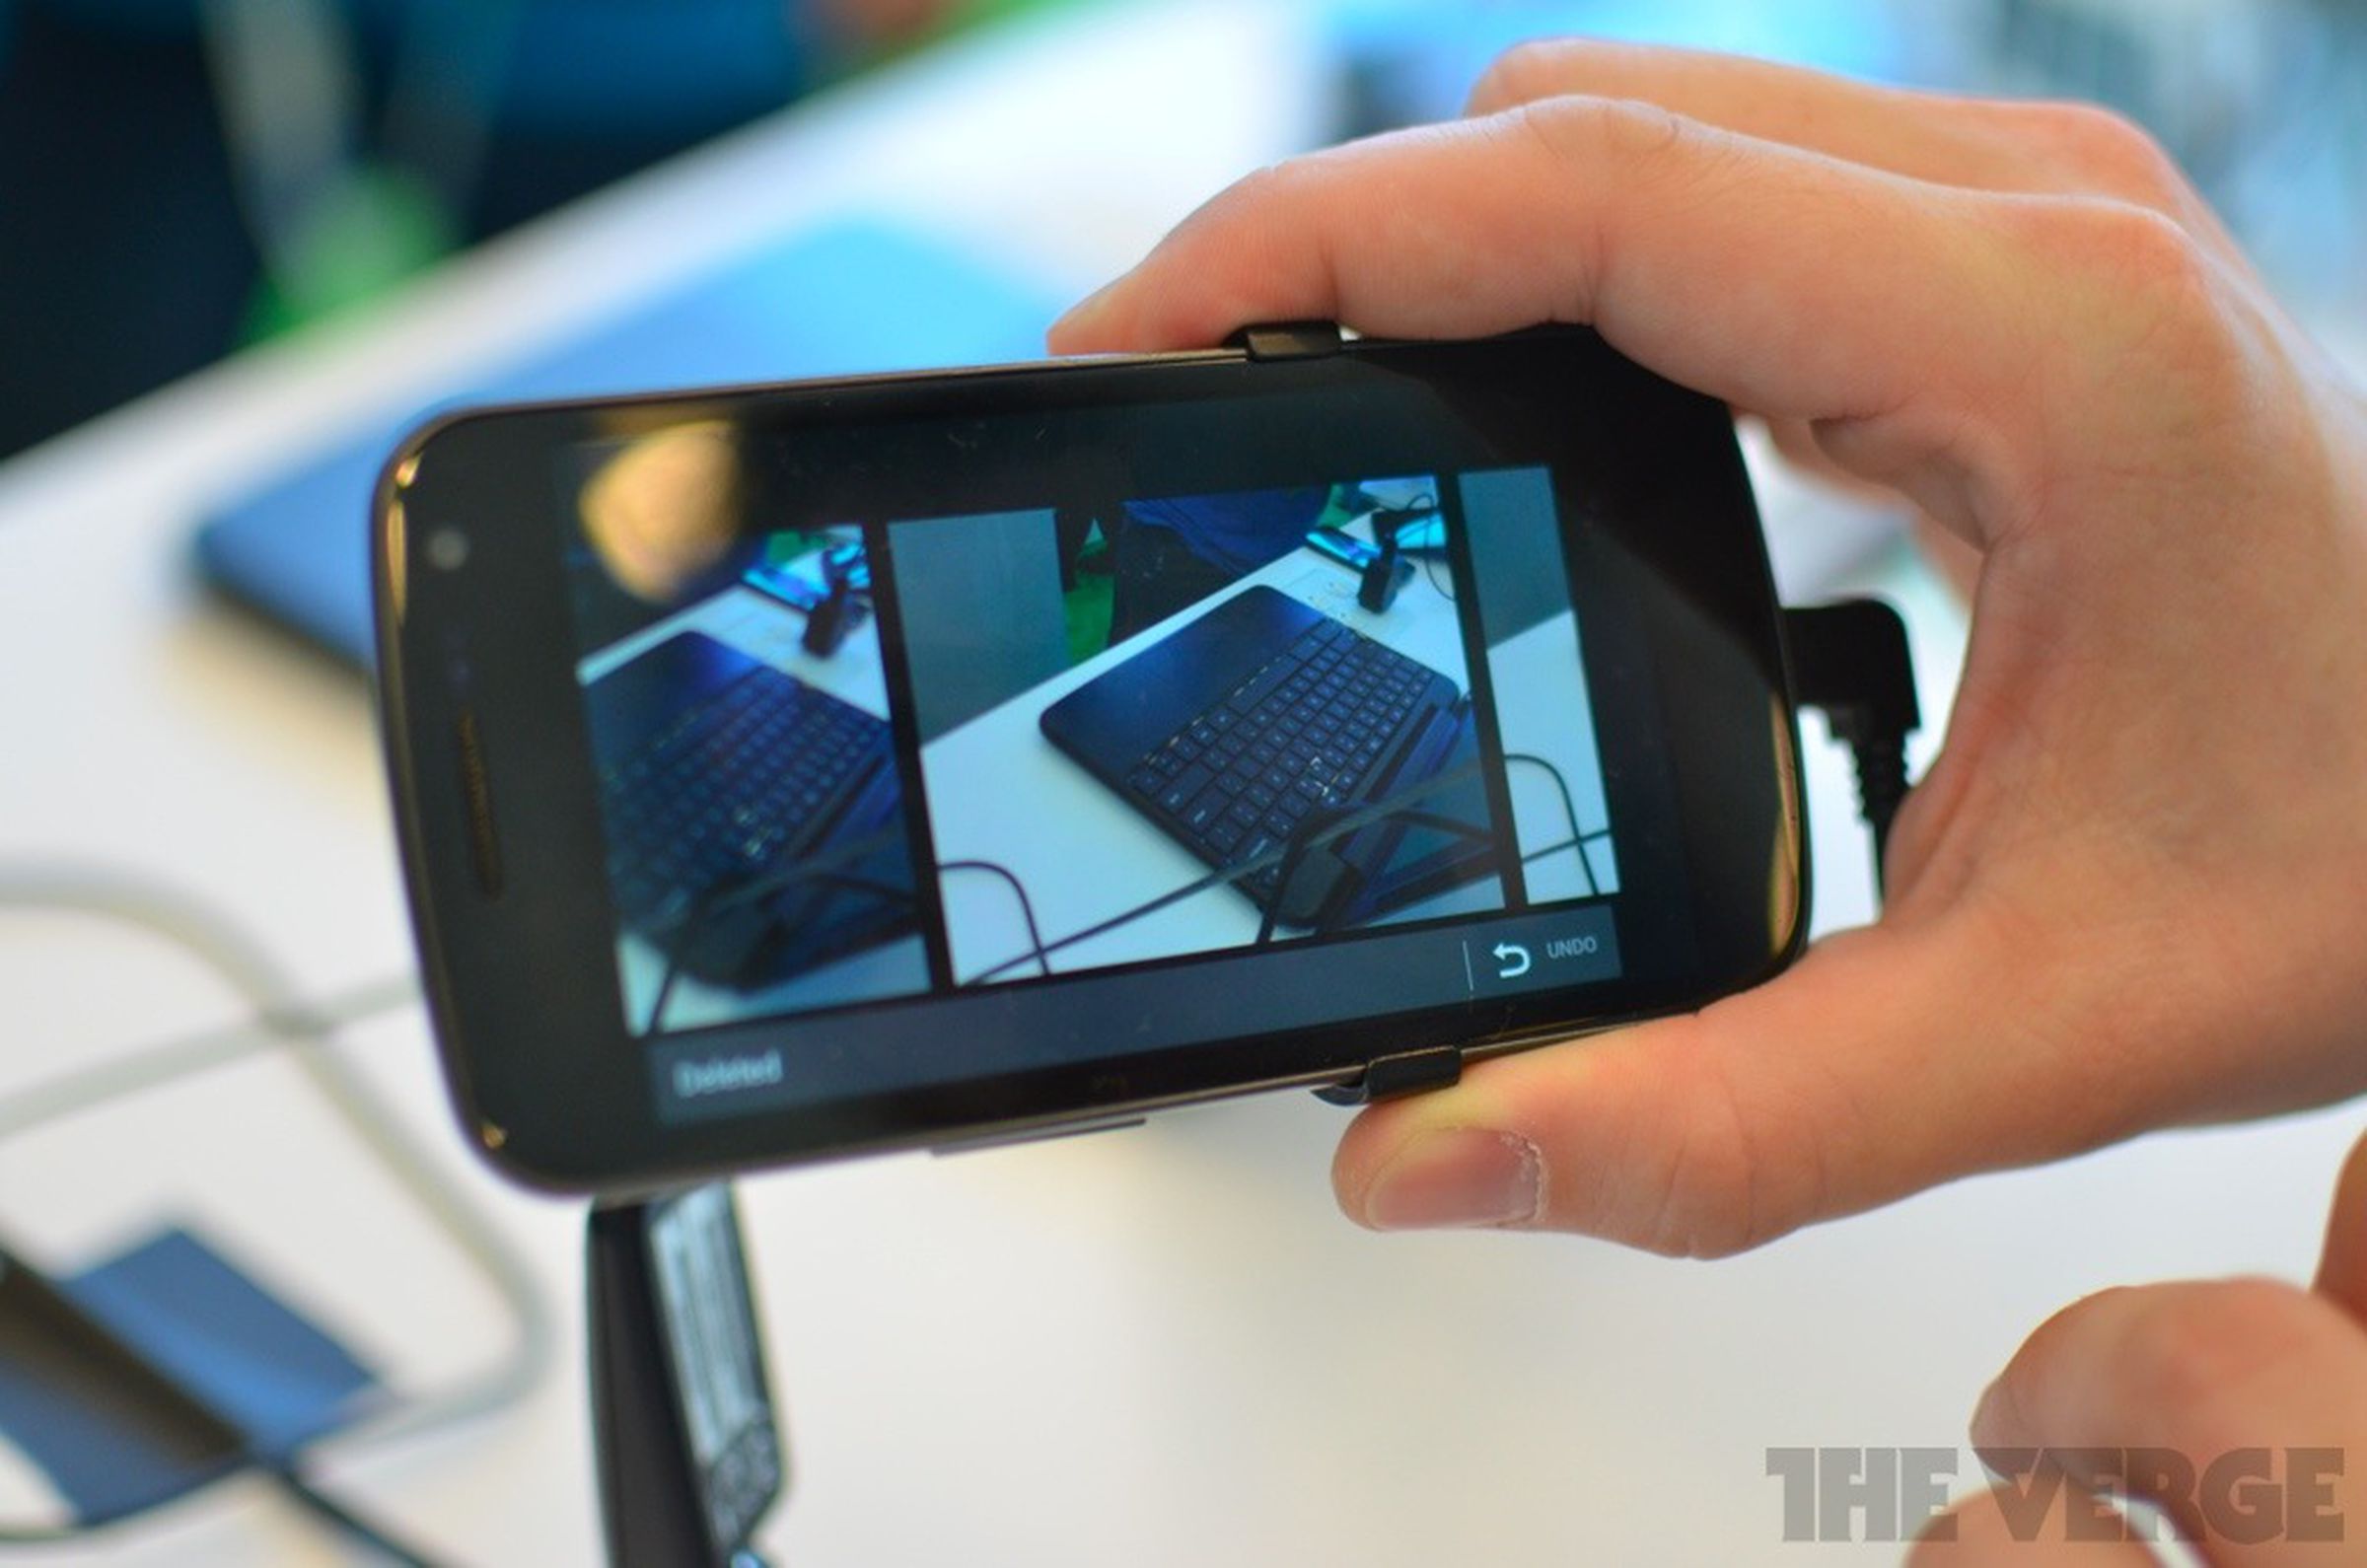 Android 4.1 Jelly Bean hands-on pictures